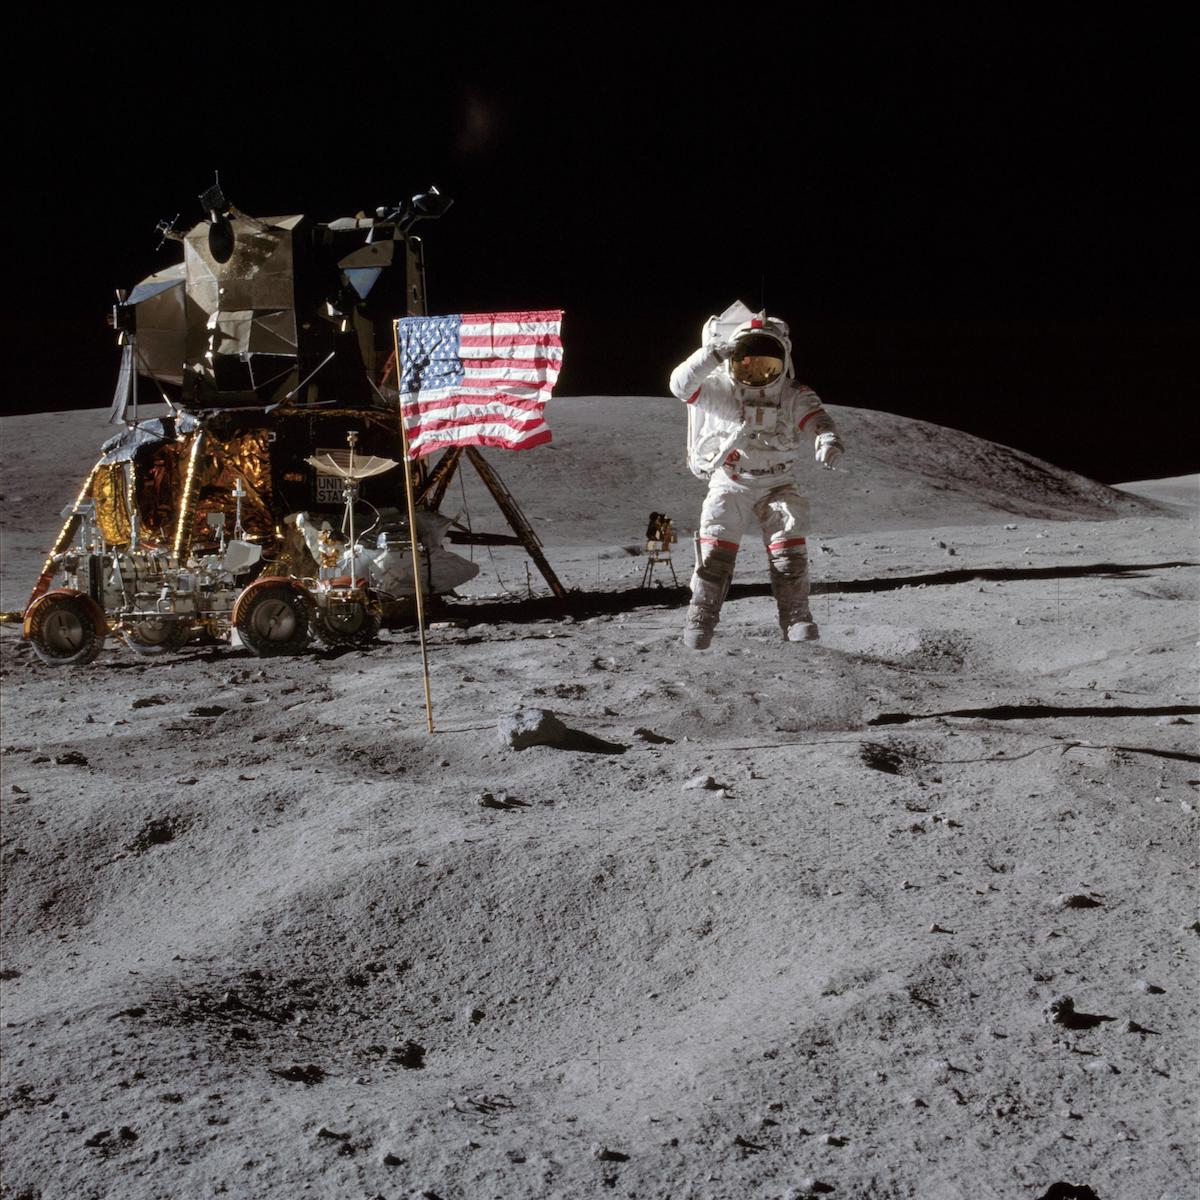 astronaut jumps and salutes near flag and lunar module